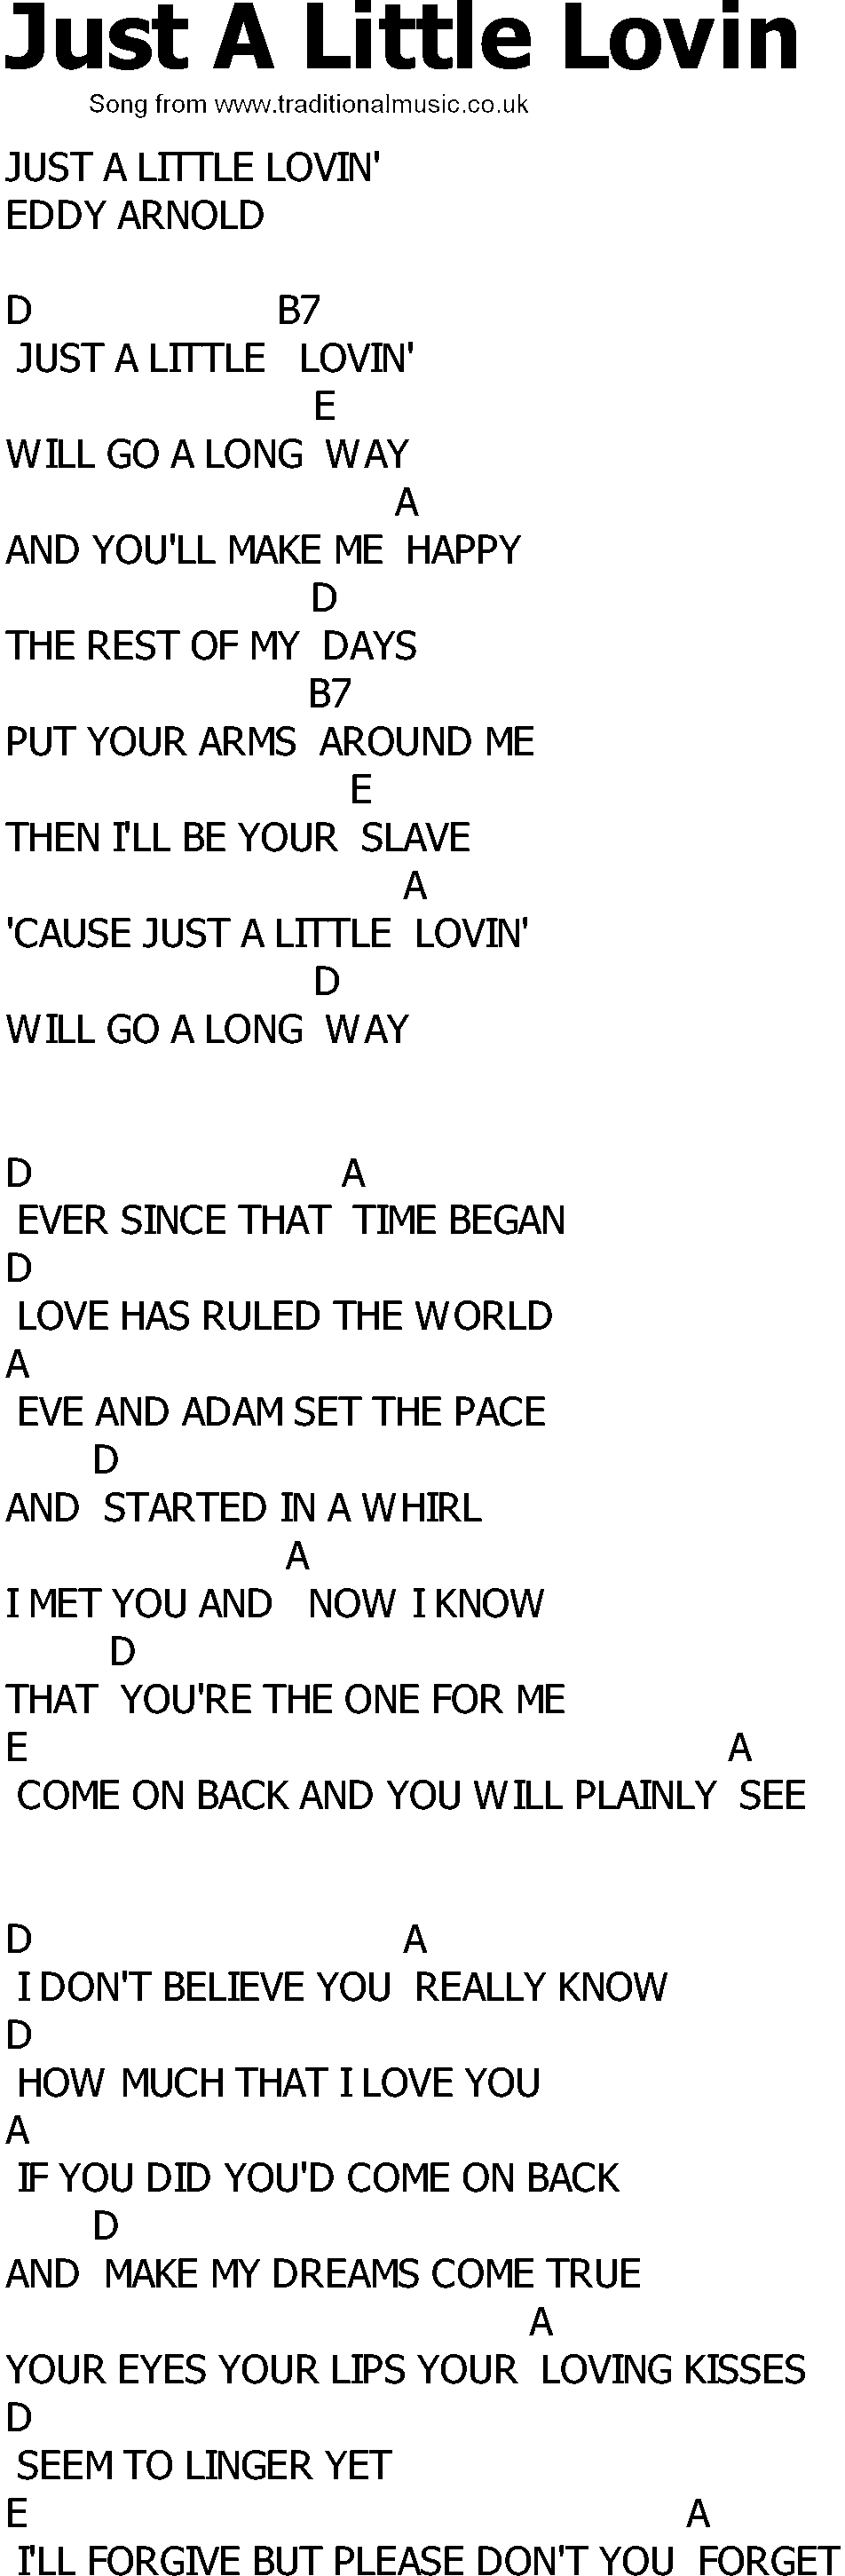 Old Country song lyrics with chords - Just A Little Lovin